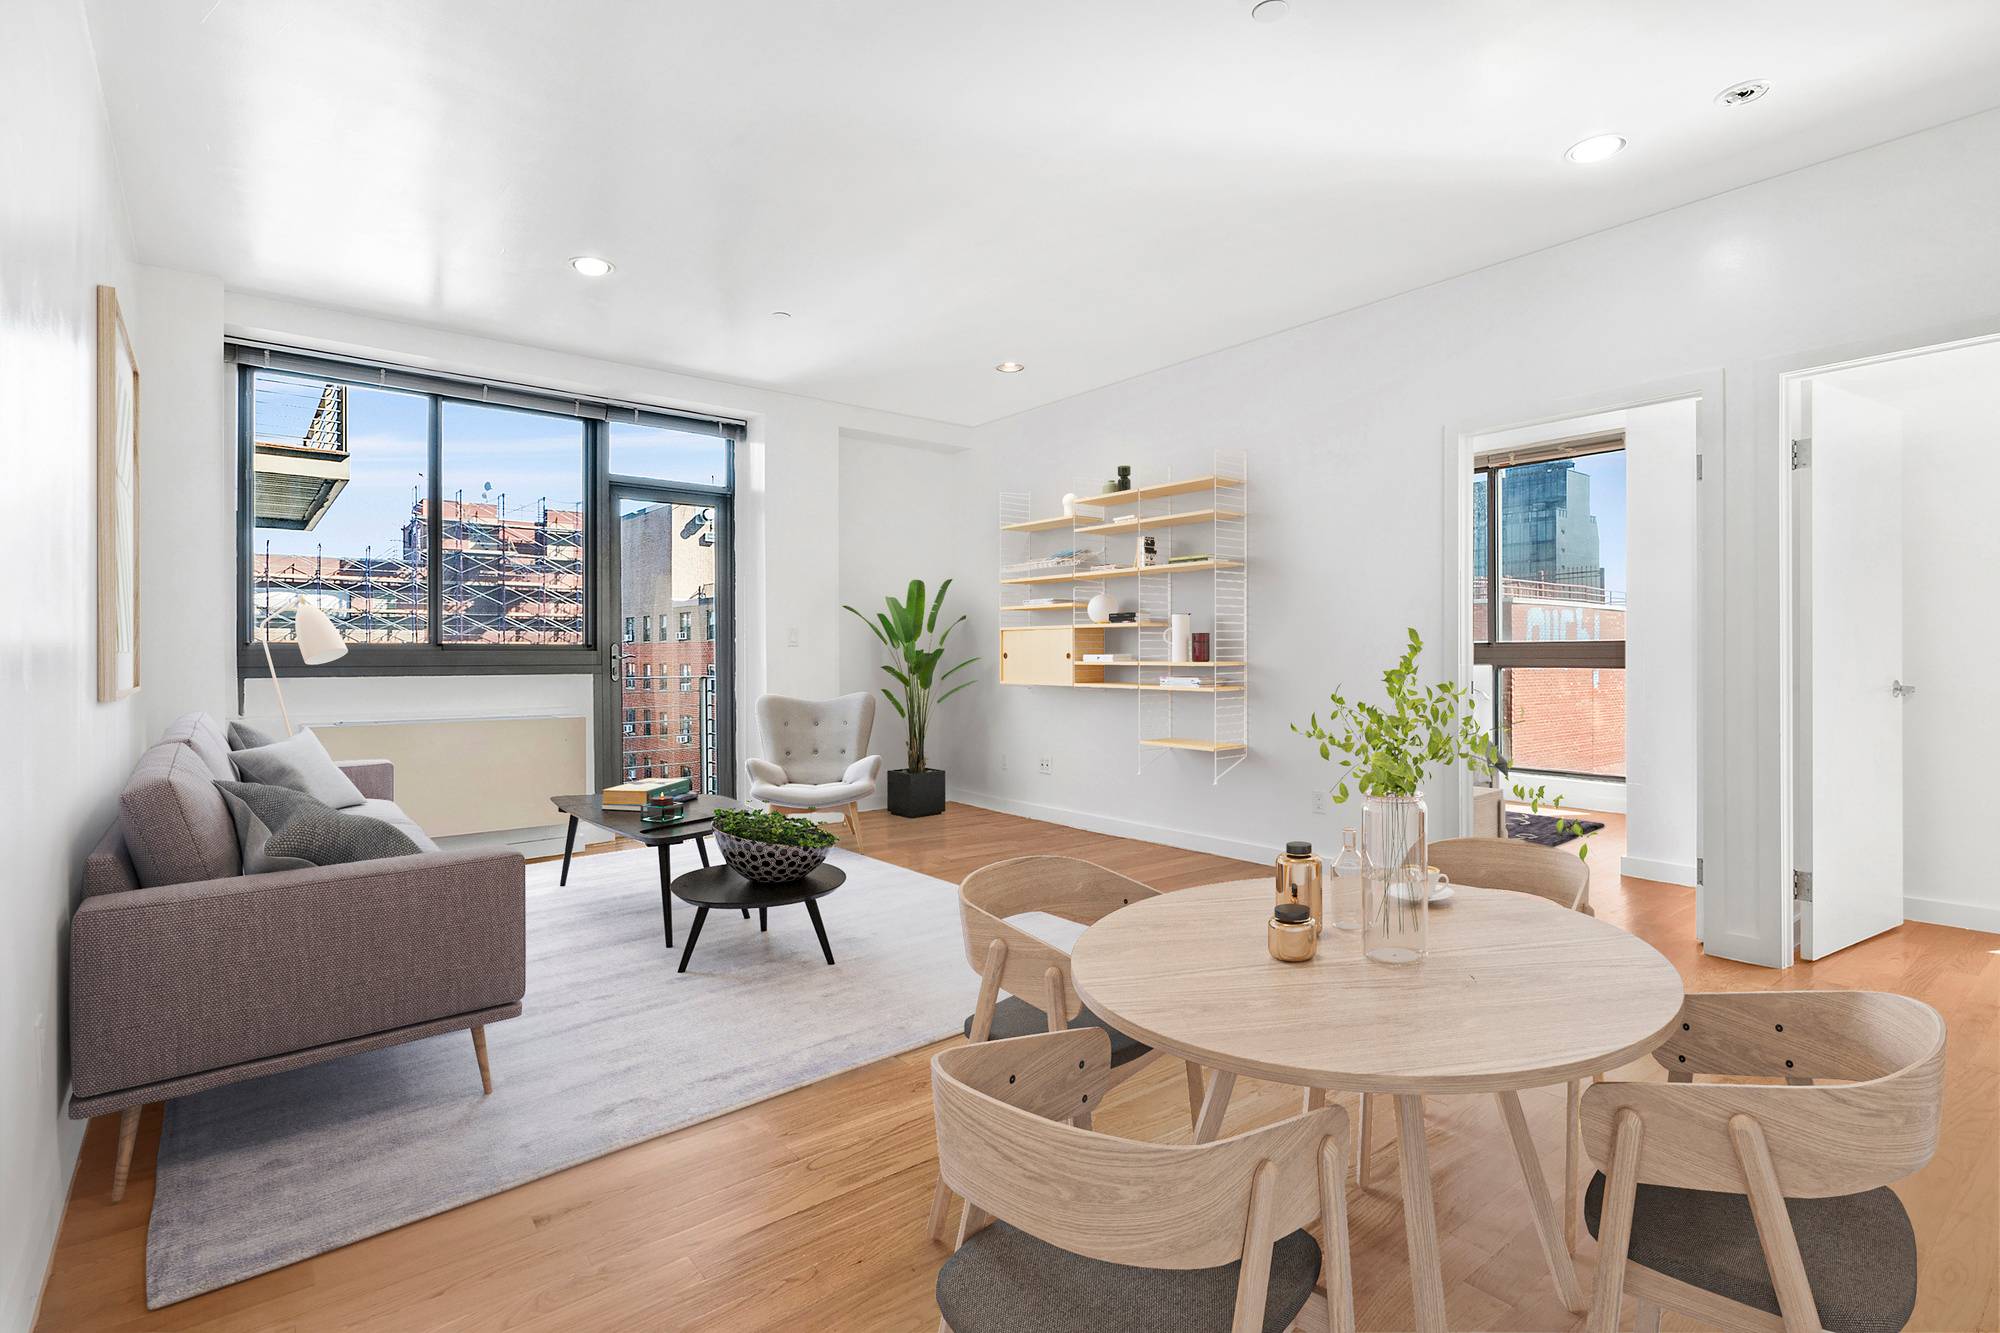 Apartment 6A is a great way to get back into the city and take advantage of an incredible opportunity in the Lower East Side.